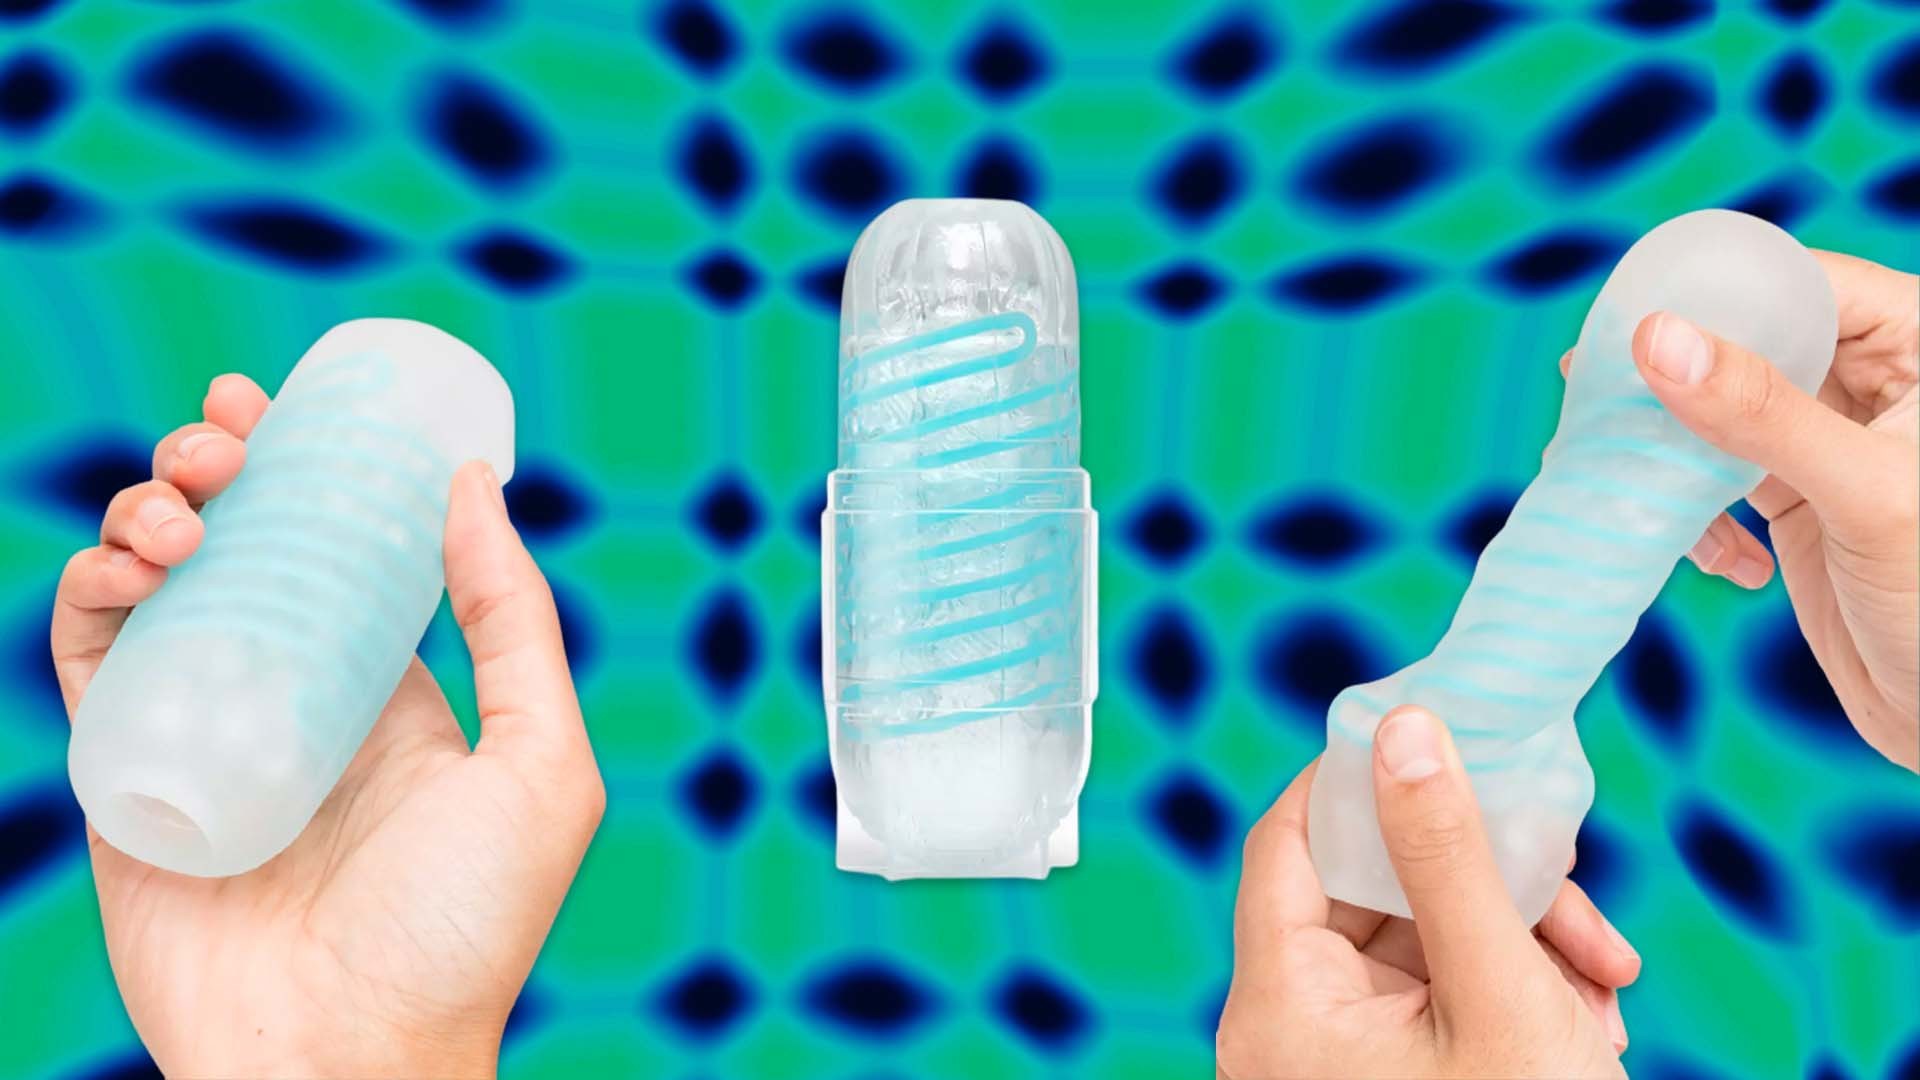 Review: The Tenga Spinner is a Great Entry-Level Male Sex Toy